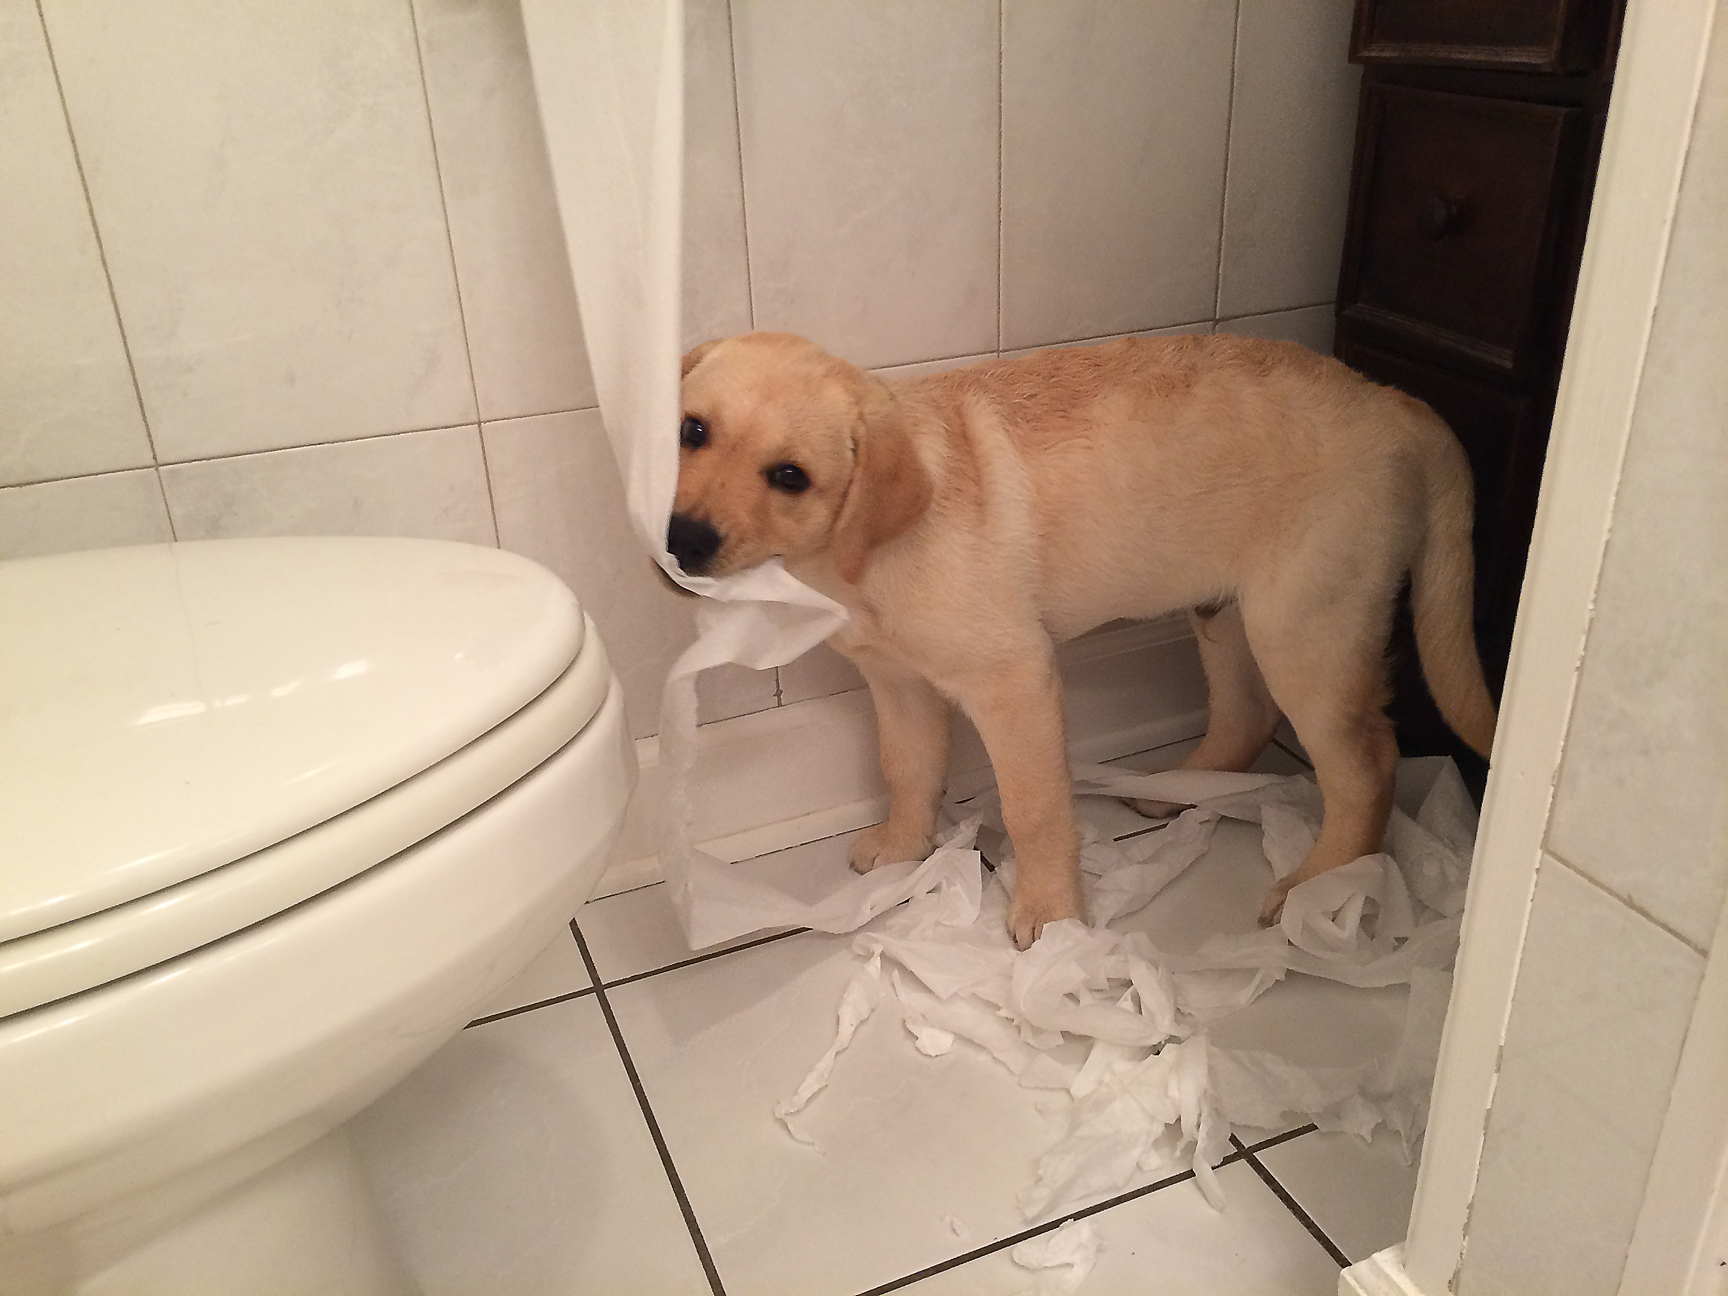  Caught dragging the toilet paper all over the house.